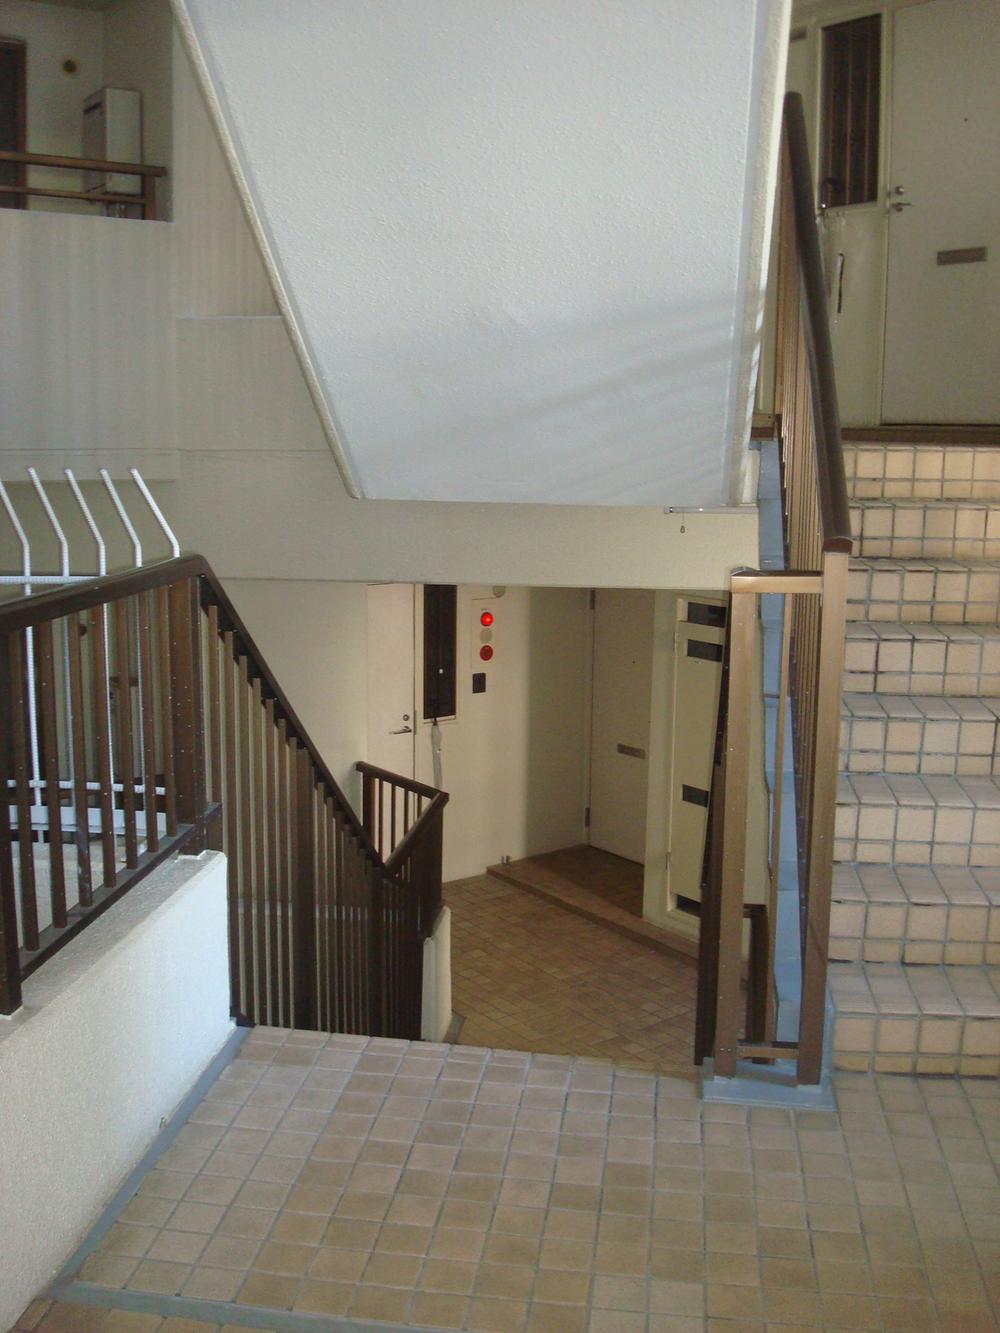 Entrance. Stairs leading to the entrance (November 2013) Shooting